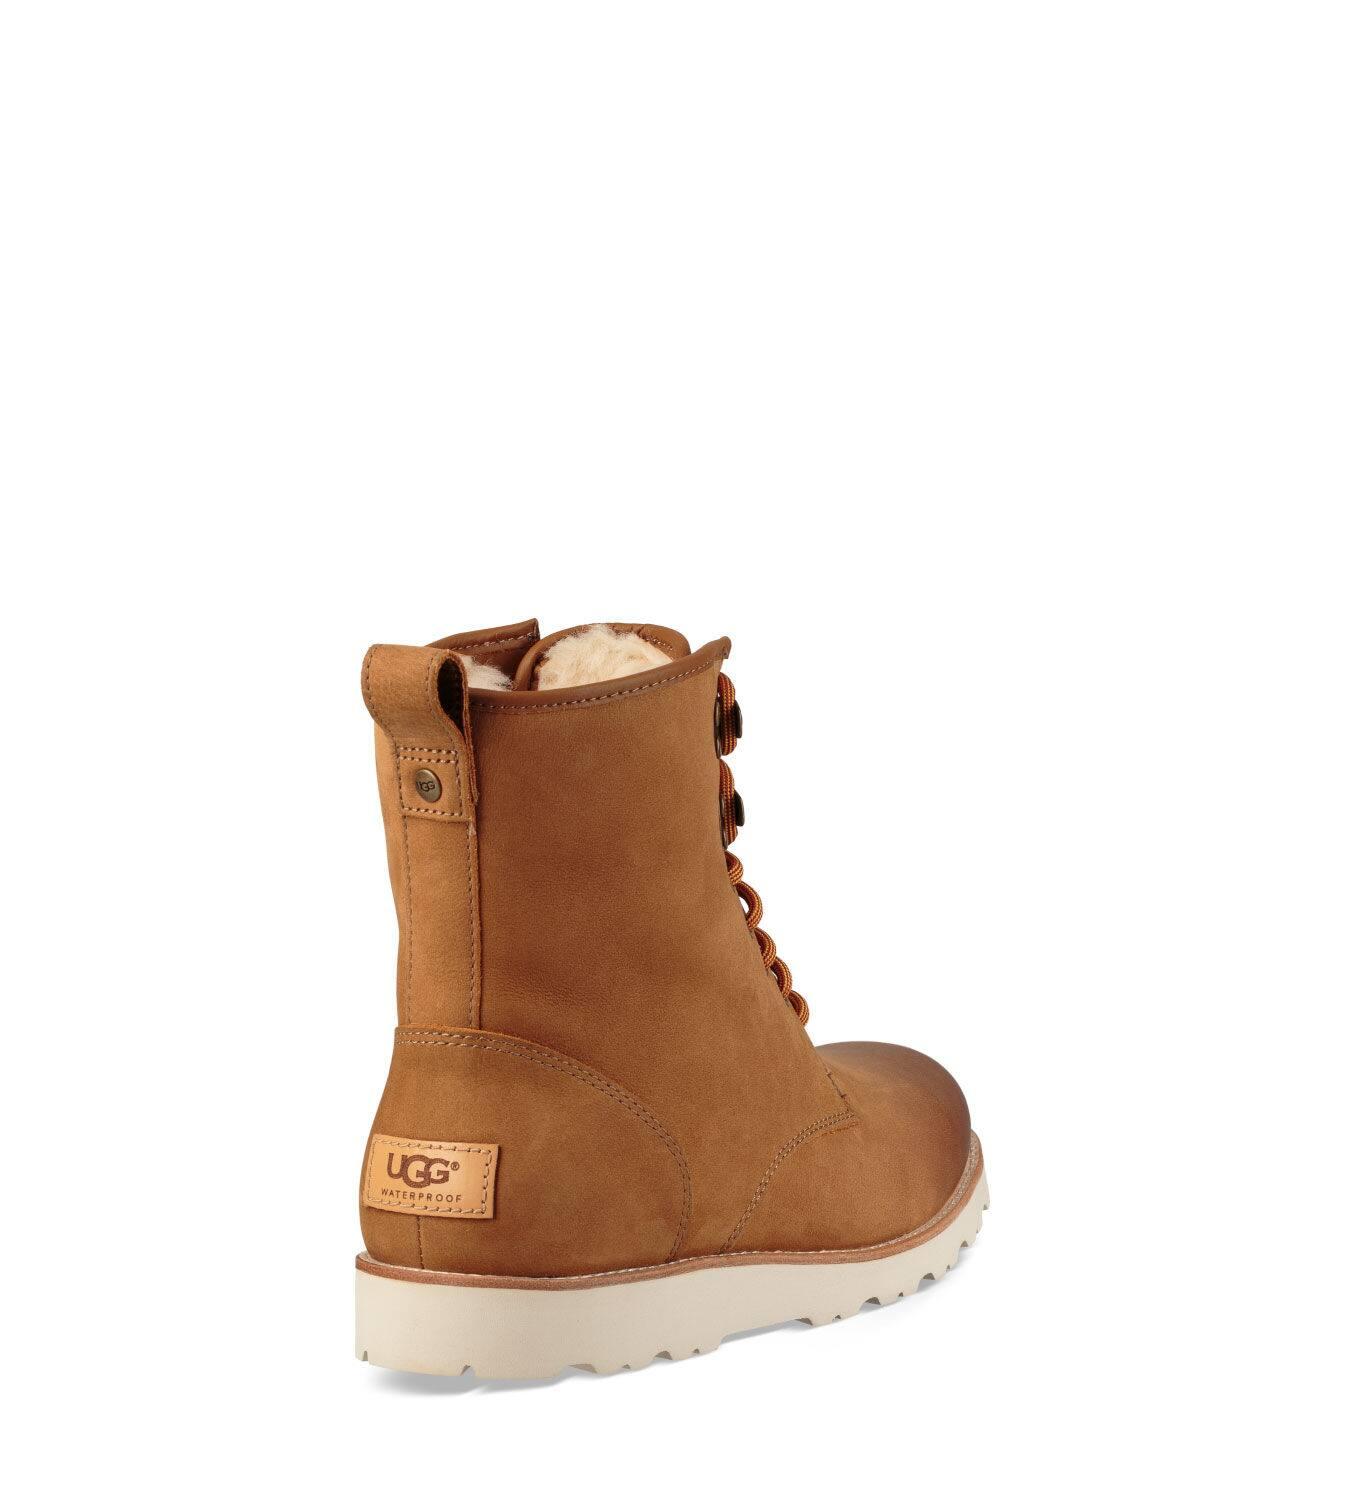 UGG Leather Hannen Tl Boot in Chestnut (Brown) for Men - Lyst